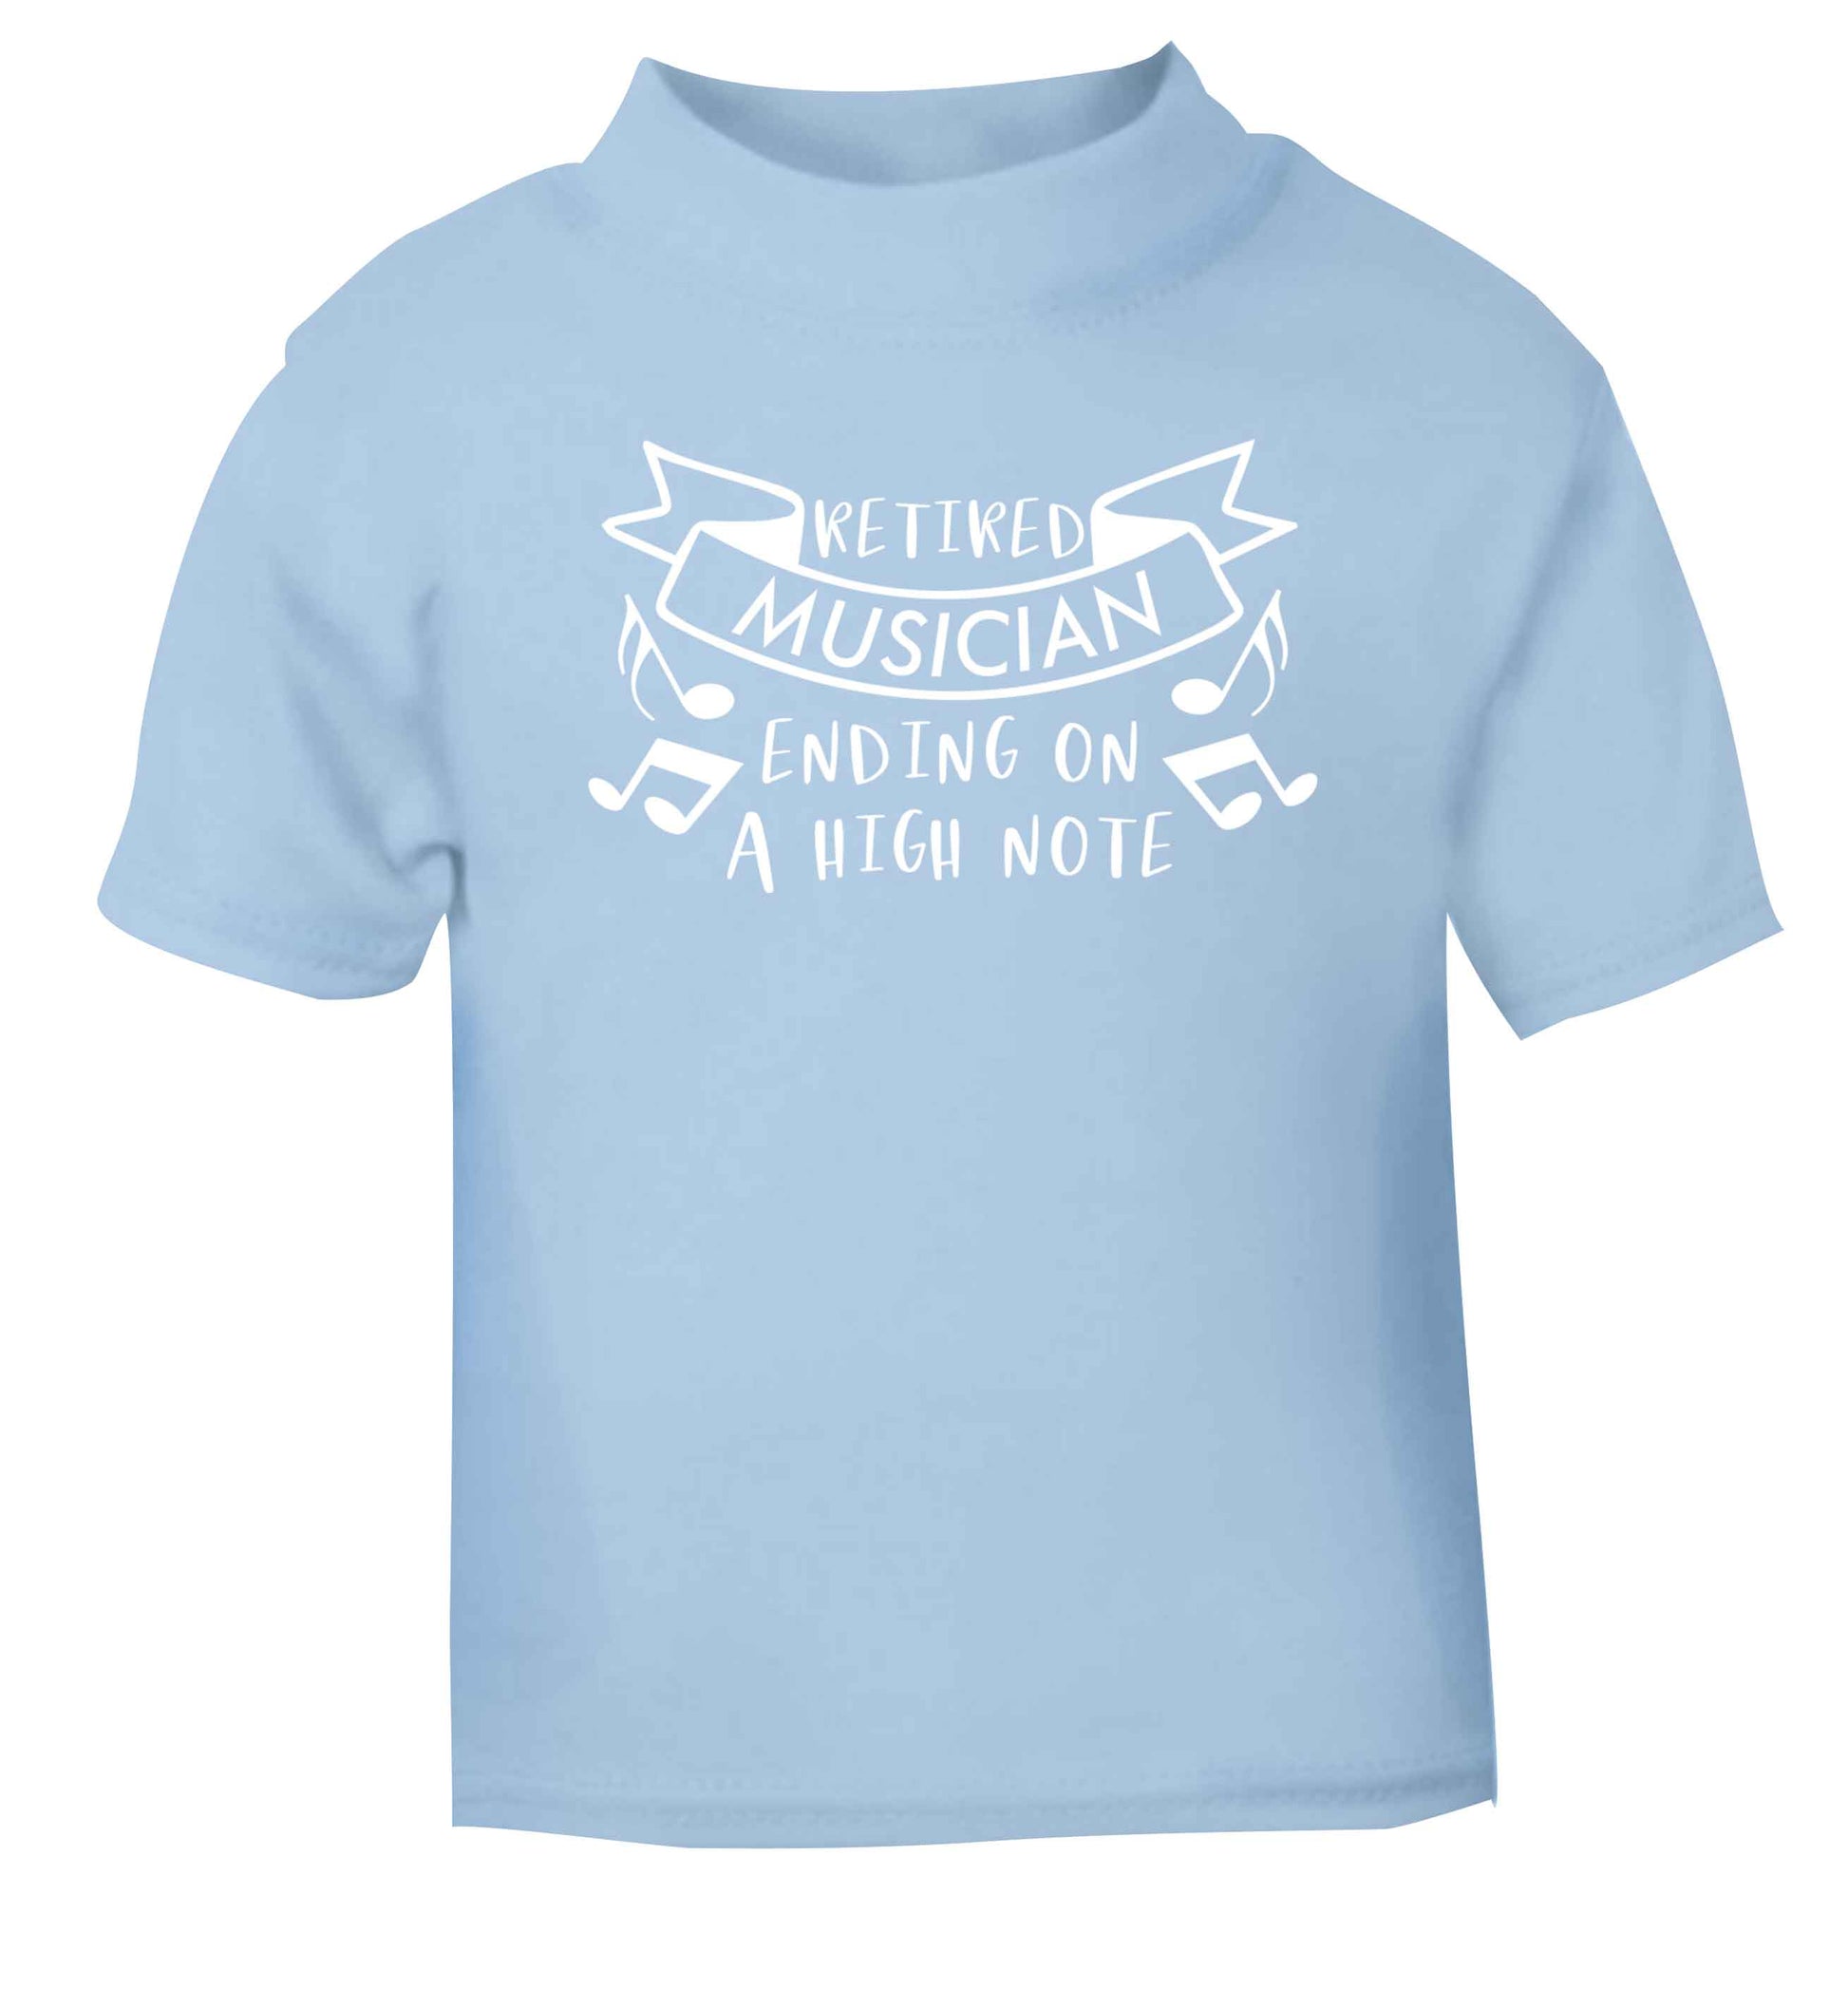 Retired musician ending on a high note light blue Baby Toddler Tshirt 2 Years